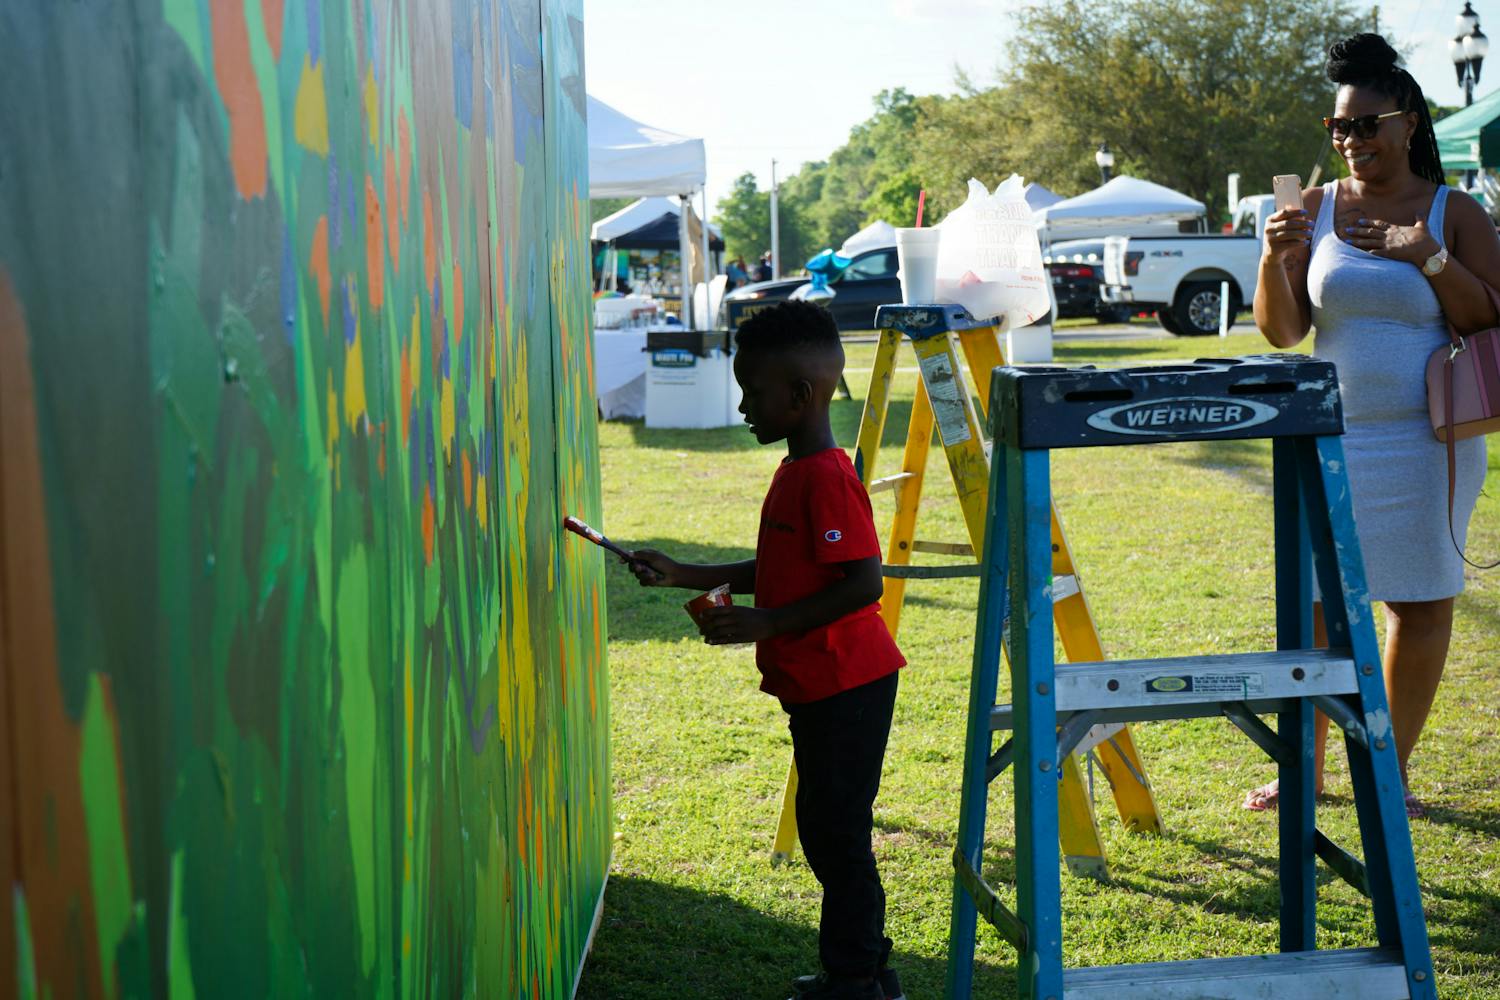 A little boy paints the kids mural setup at the Walldogs Mural Painting festival in High Springs Friday, March 24, 2023.